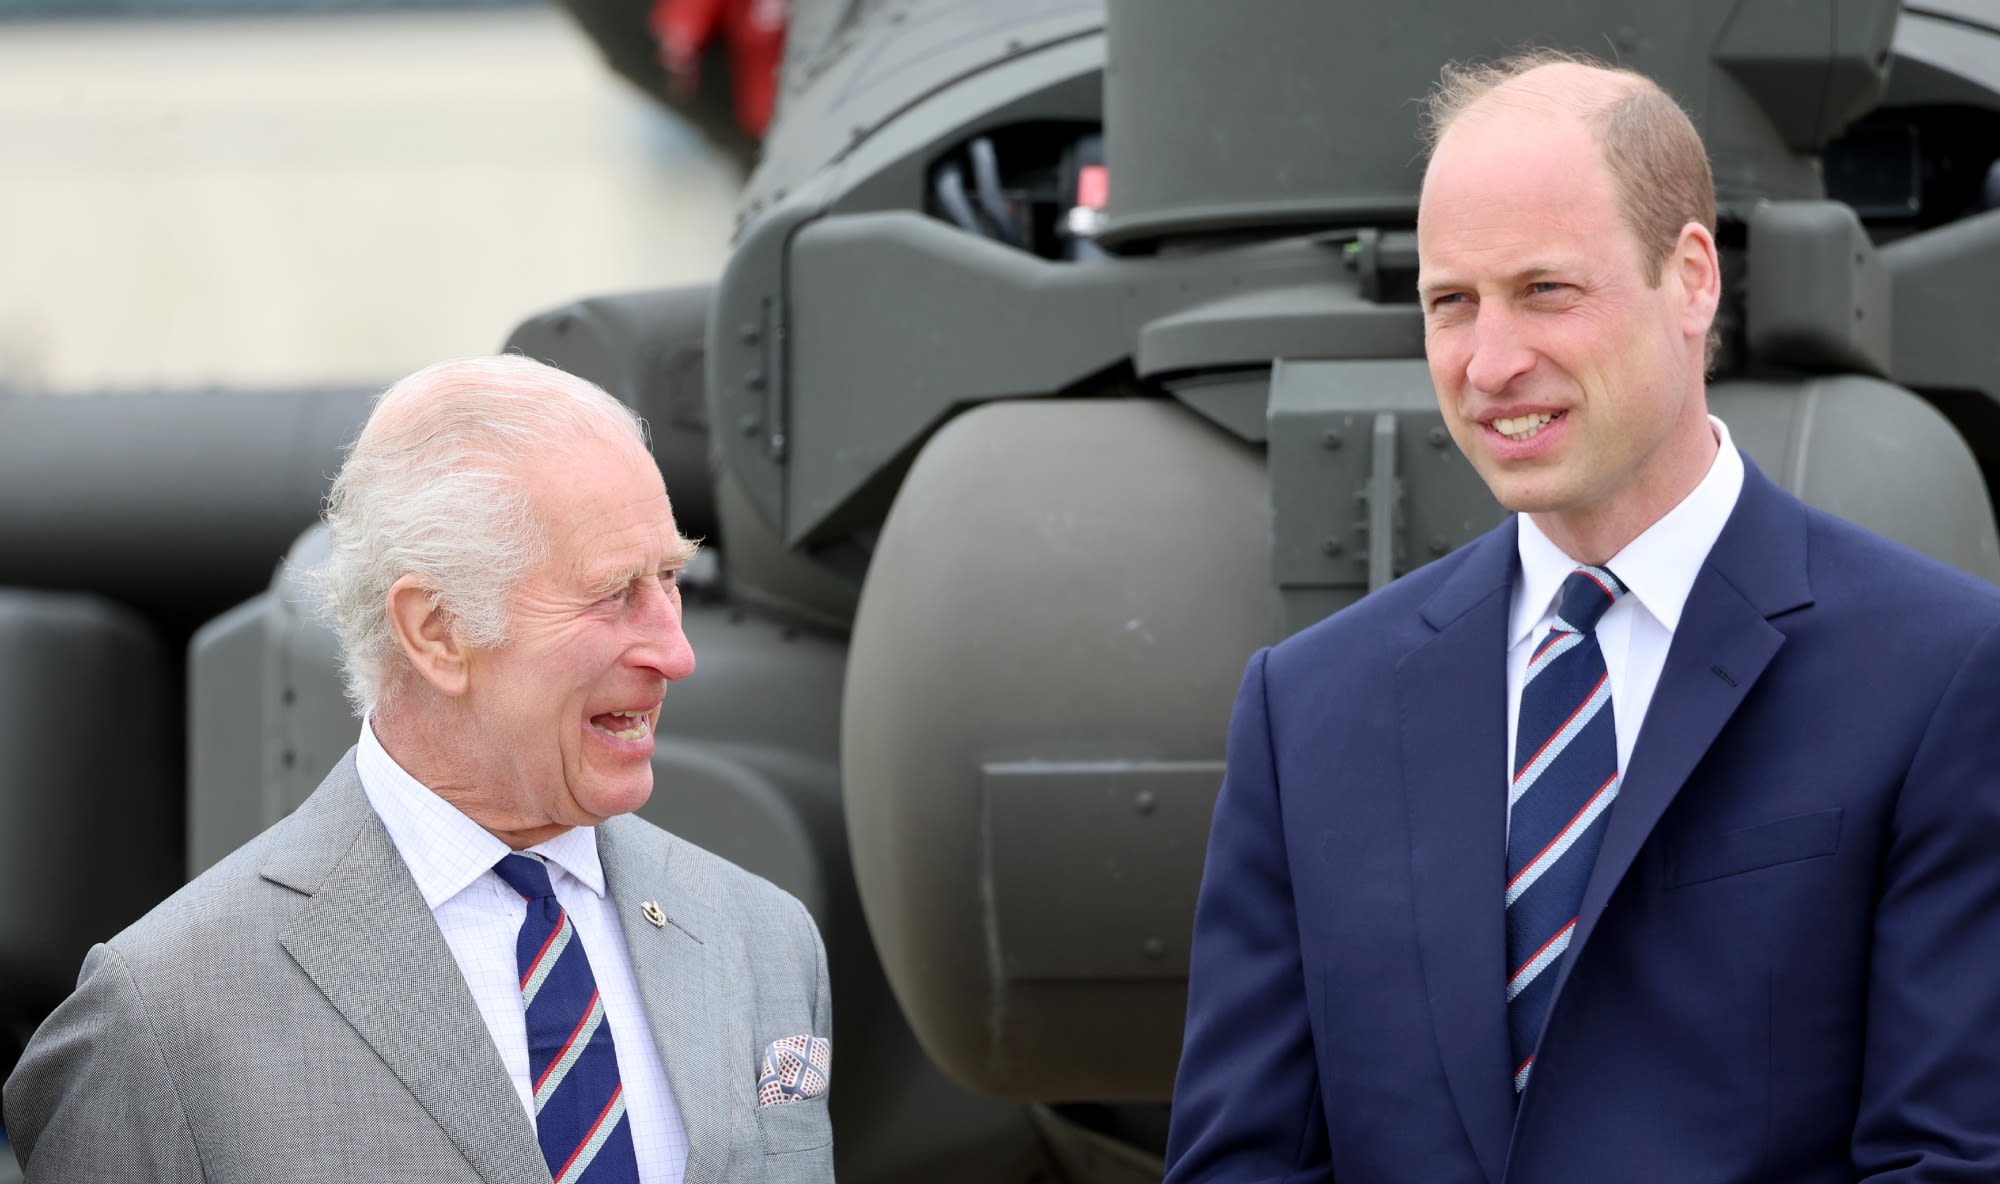 King Charles III Unveils Prince William’s New Military Title at Handover Ceremony in Complementary Businesswear